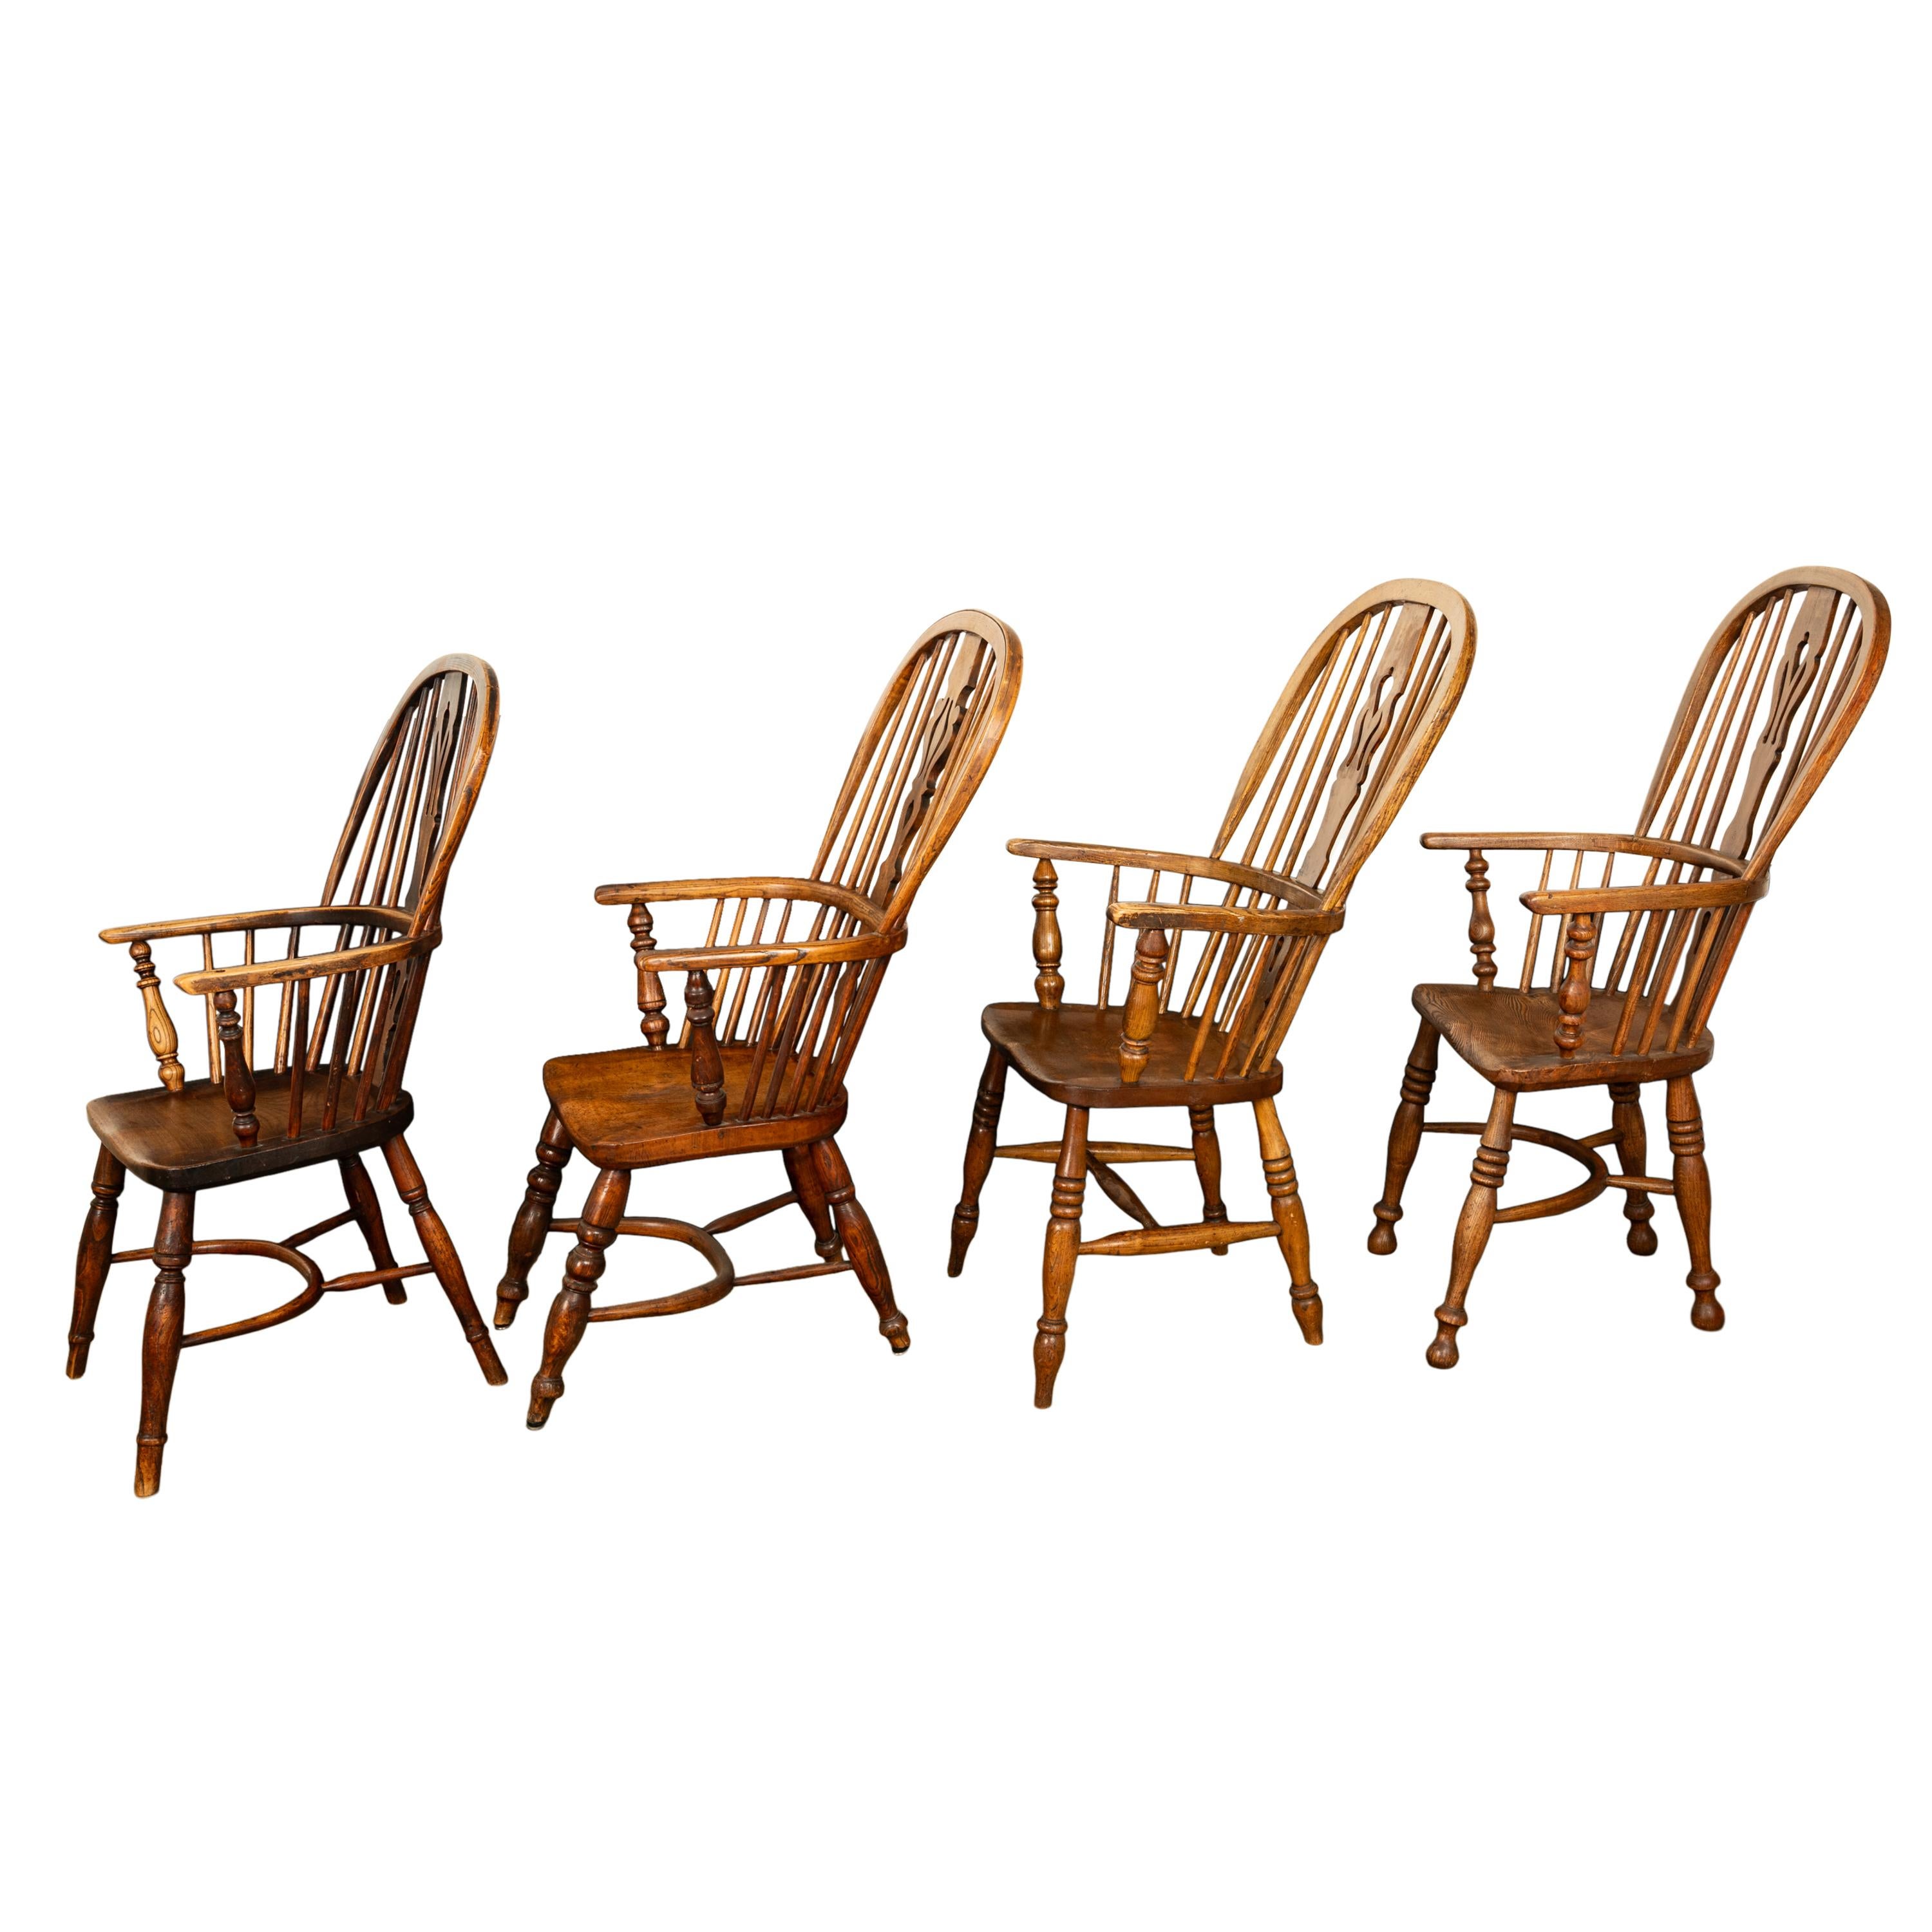 Mid-19th Century Set 4 Antique 19thC High-backed English Ash Elm Country Windsor Arm Chairs 1840  For Sale